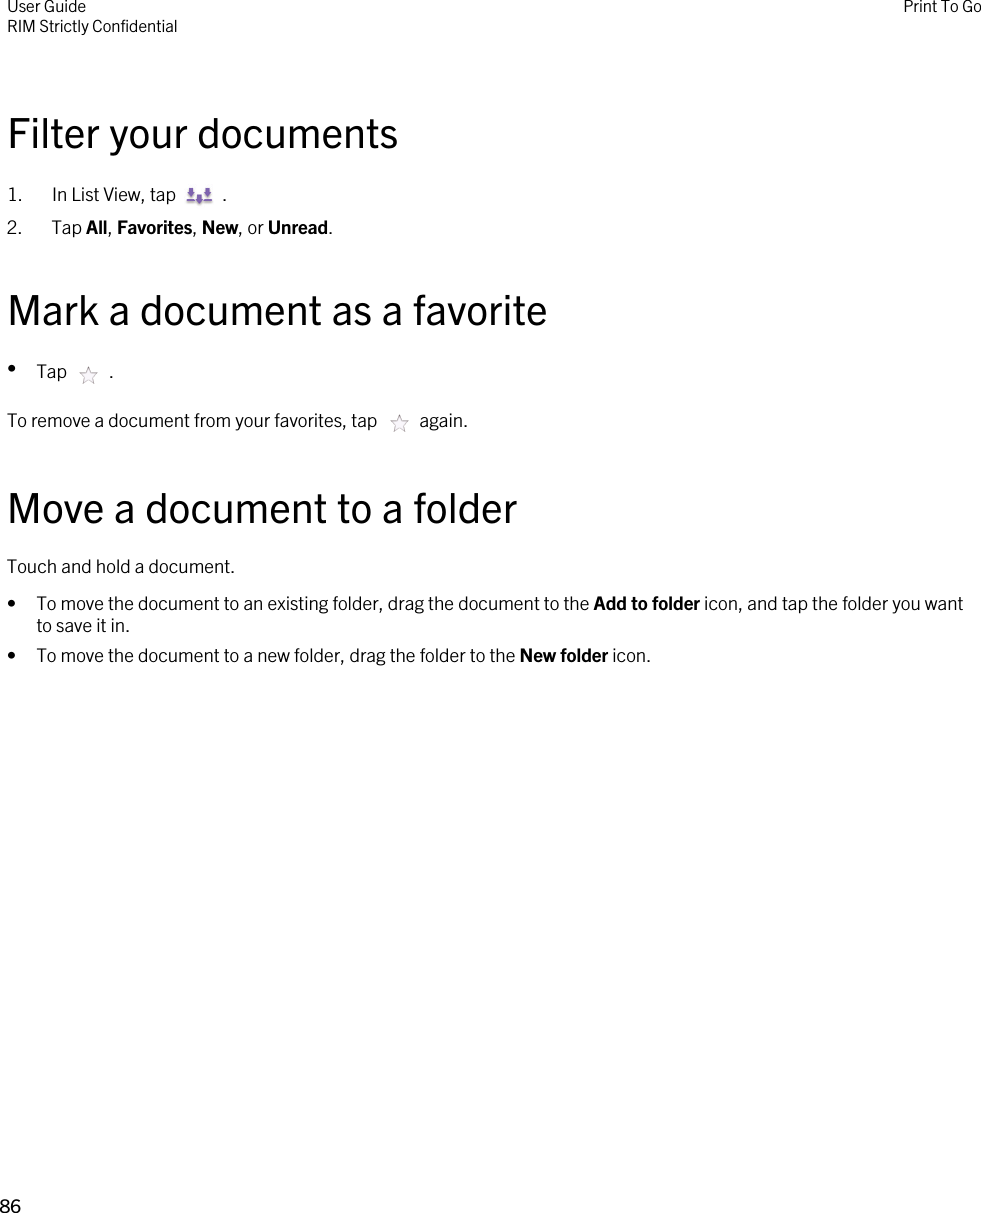 Filter your documents1.  In List View, tap    . 2. Tap All, Favorites, New, or Unread.Mark a document as a favorite•Tap    .To remove a document from your favorites, tap    again.Move a document to a folderTouch and hold a document.• To move the document to an existing folder, drag the document to the Add to folder icon, and tap the folder you want to save it in.• To move the document to a new folder, drag the folder to the New folder icon.User GuideRIM Strictly Confidential Print To Go86 